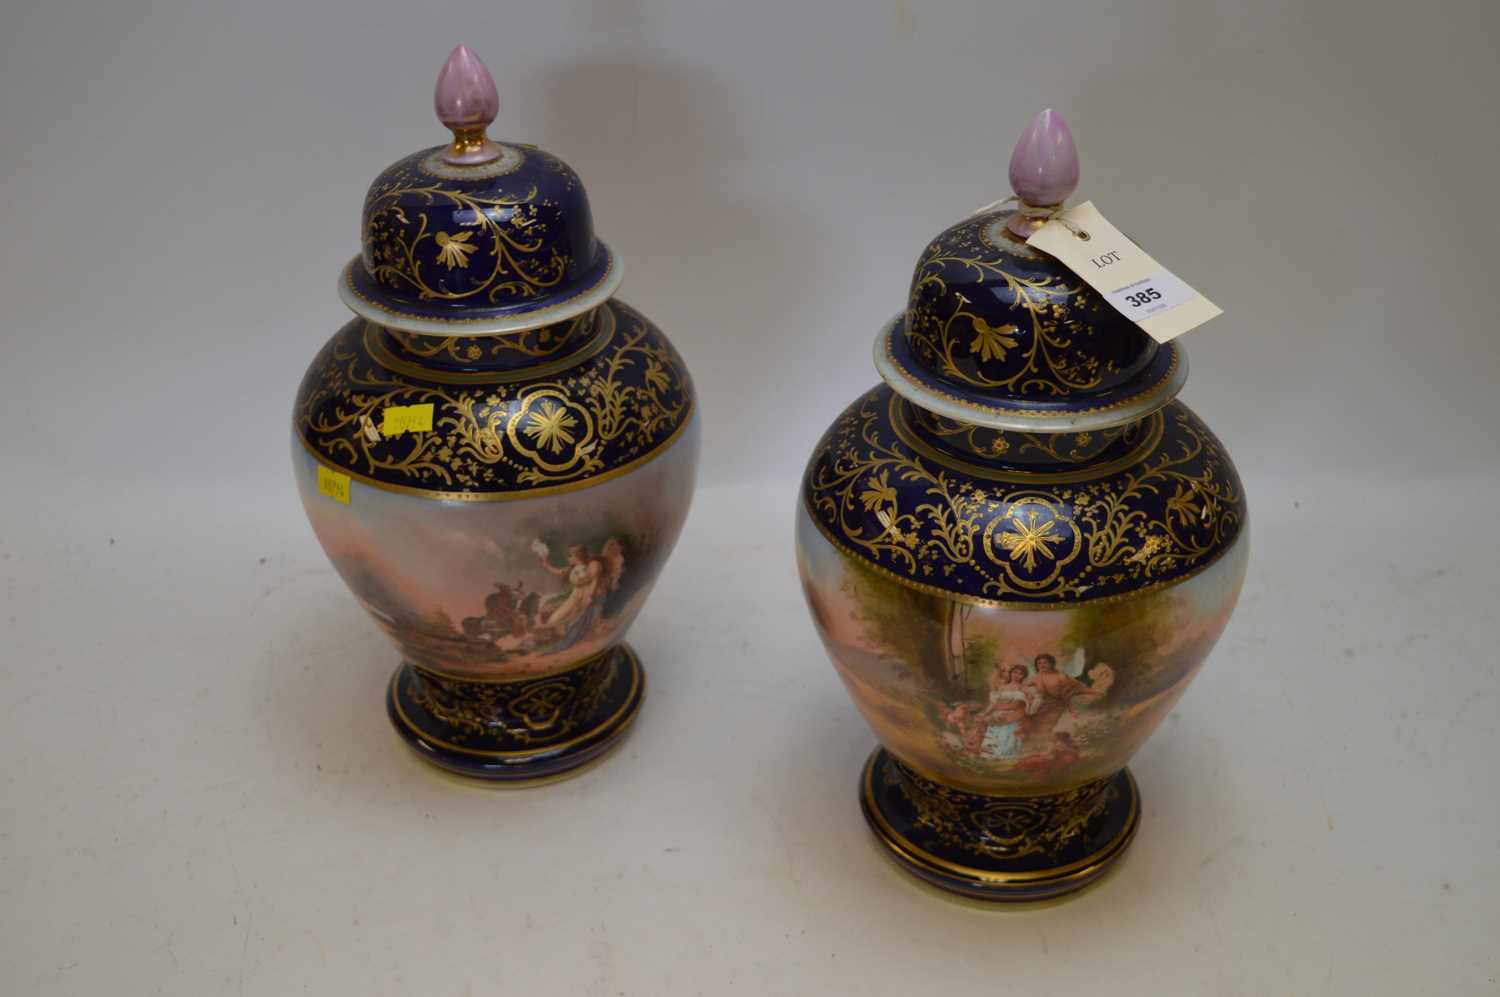 Lot 385 - Vienna vases and covers